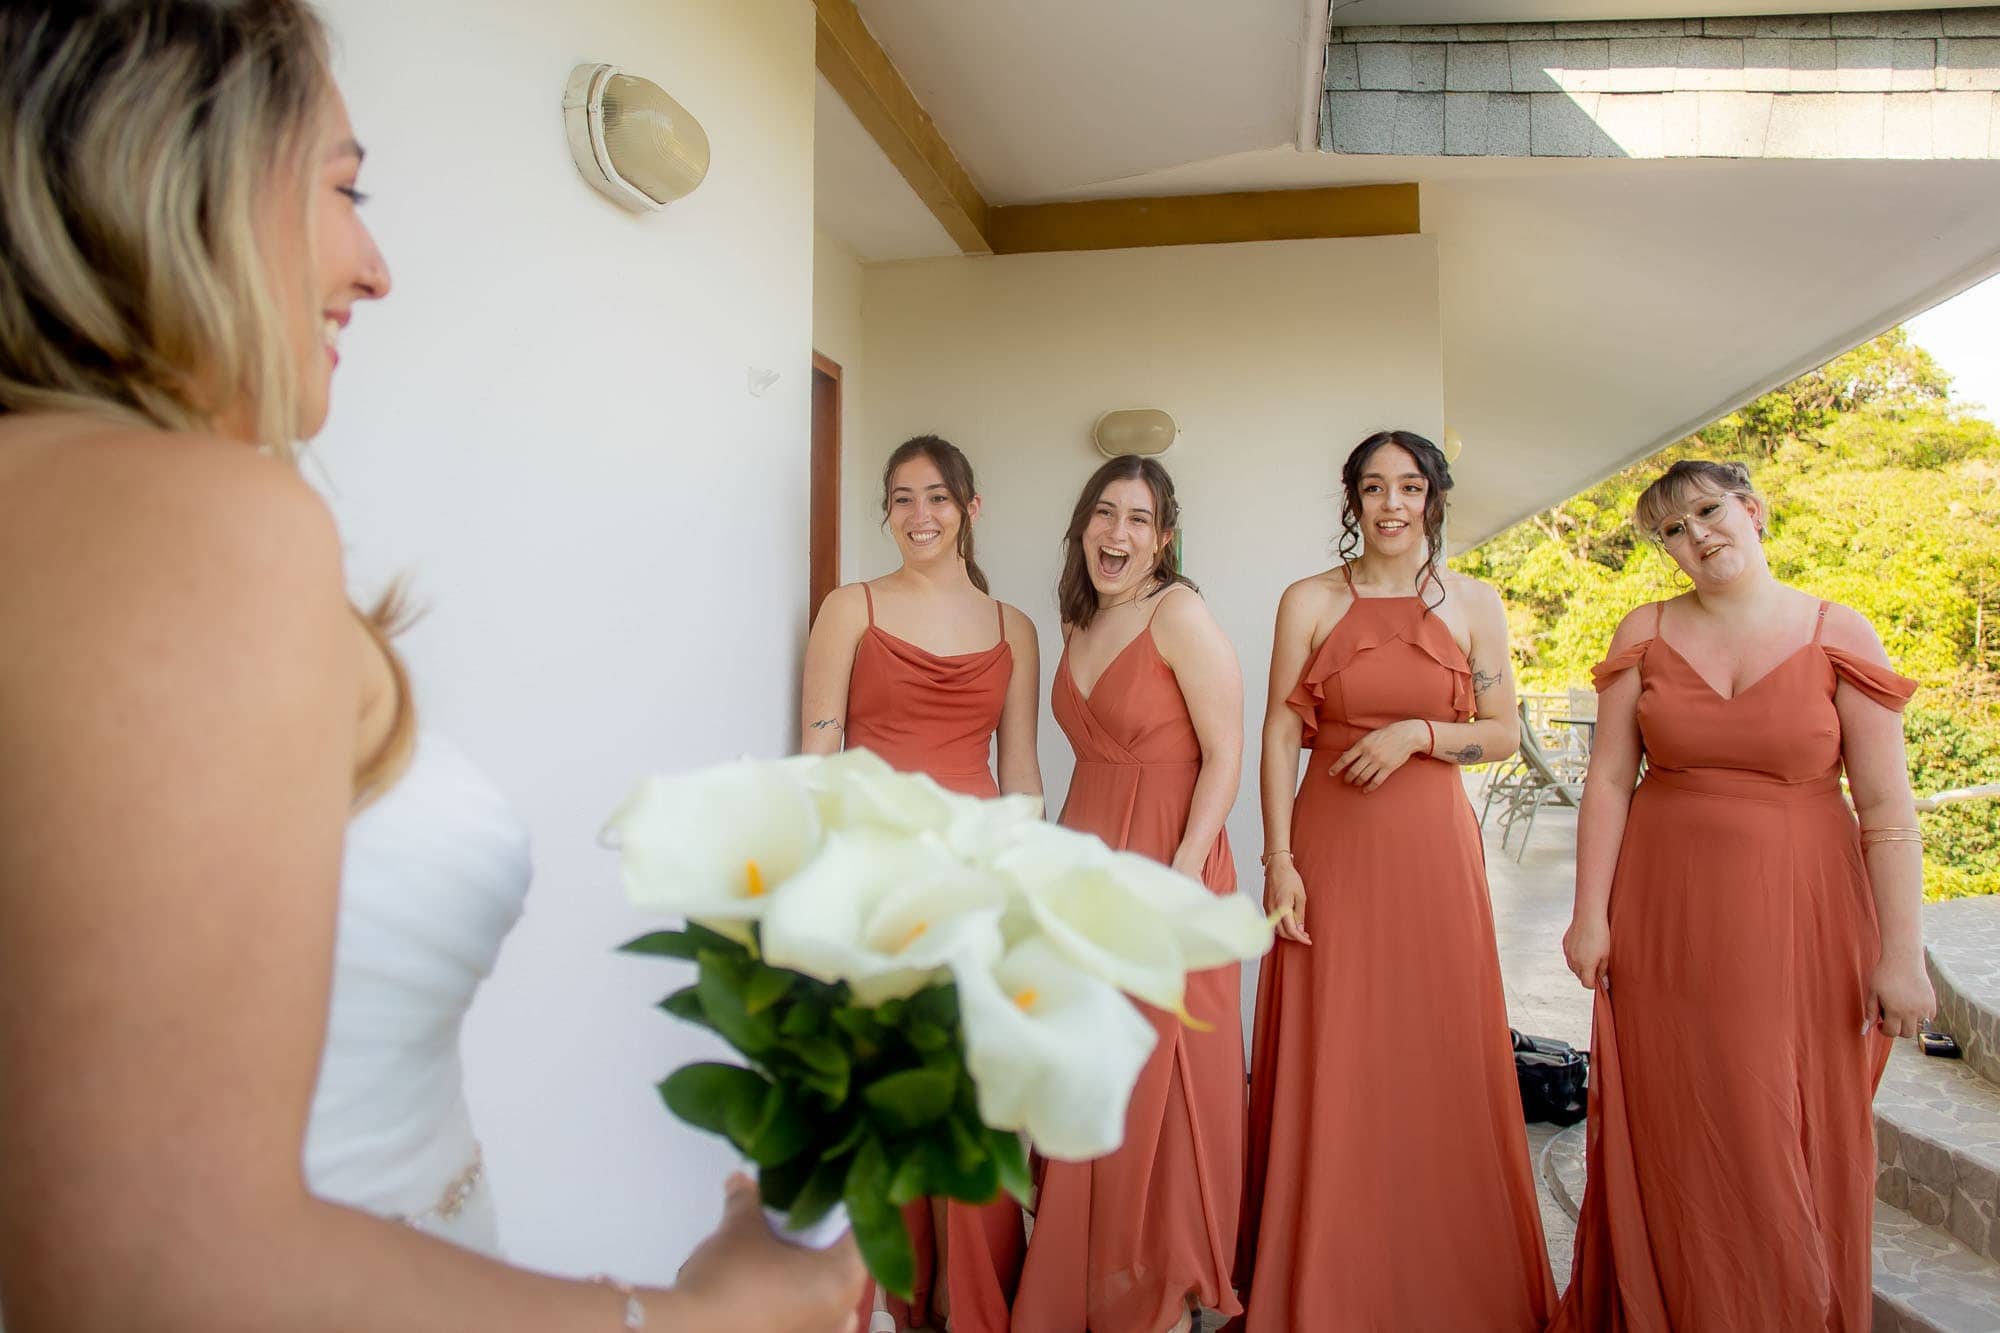 Bridesmaids' first look with the bride!